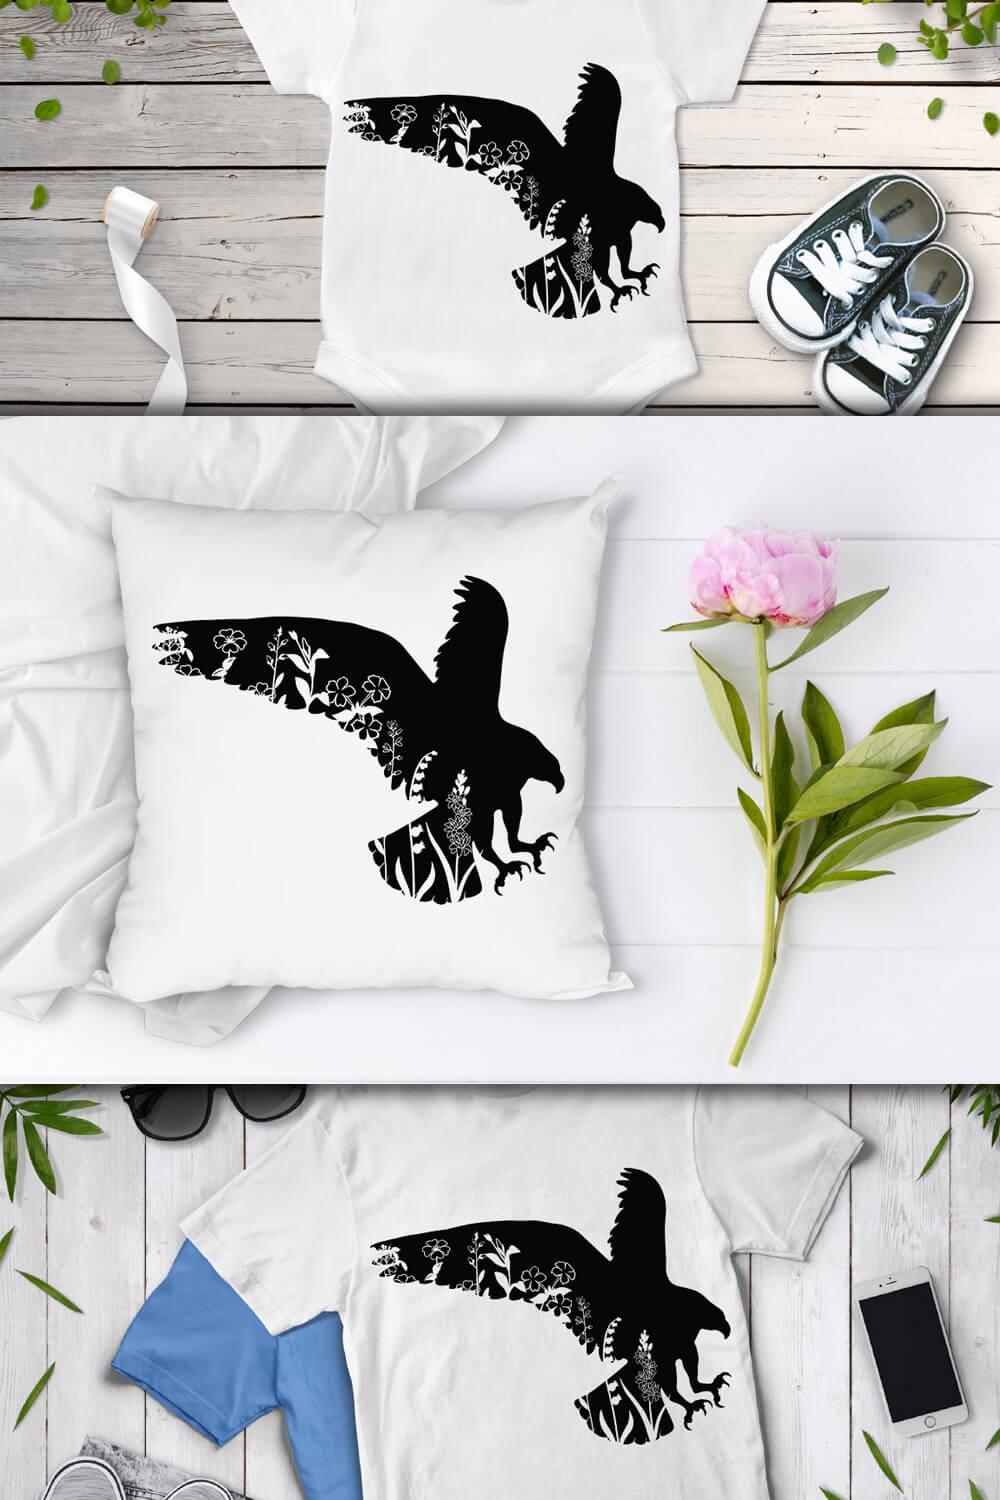 Clothes for children and adults, as well as pillows decorated with a black floral eagle.